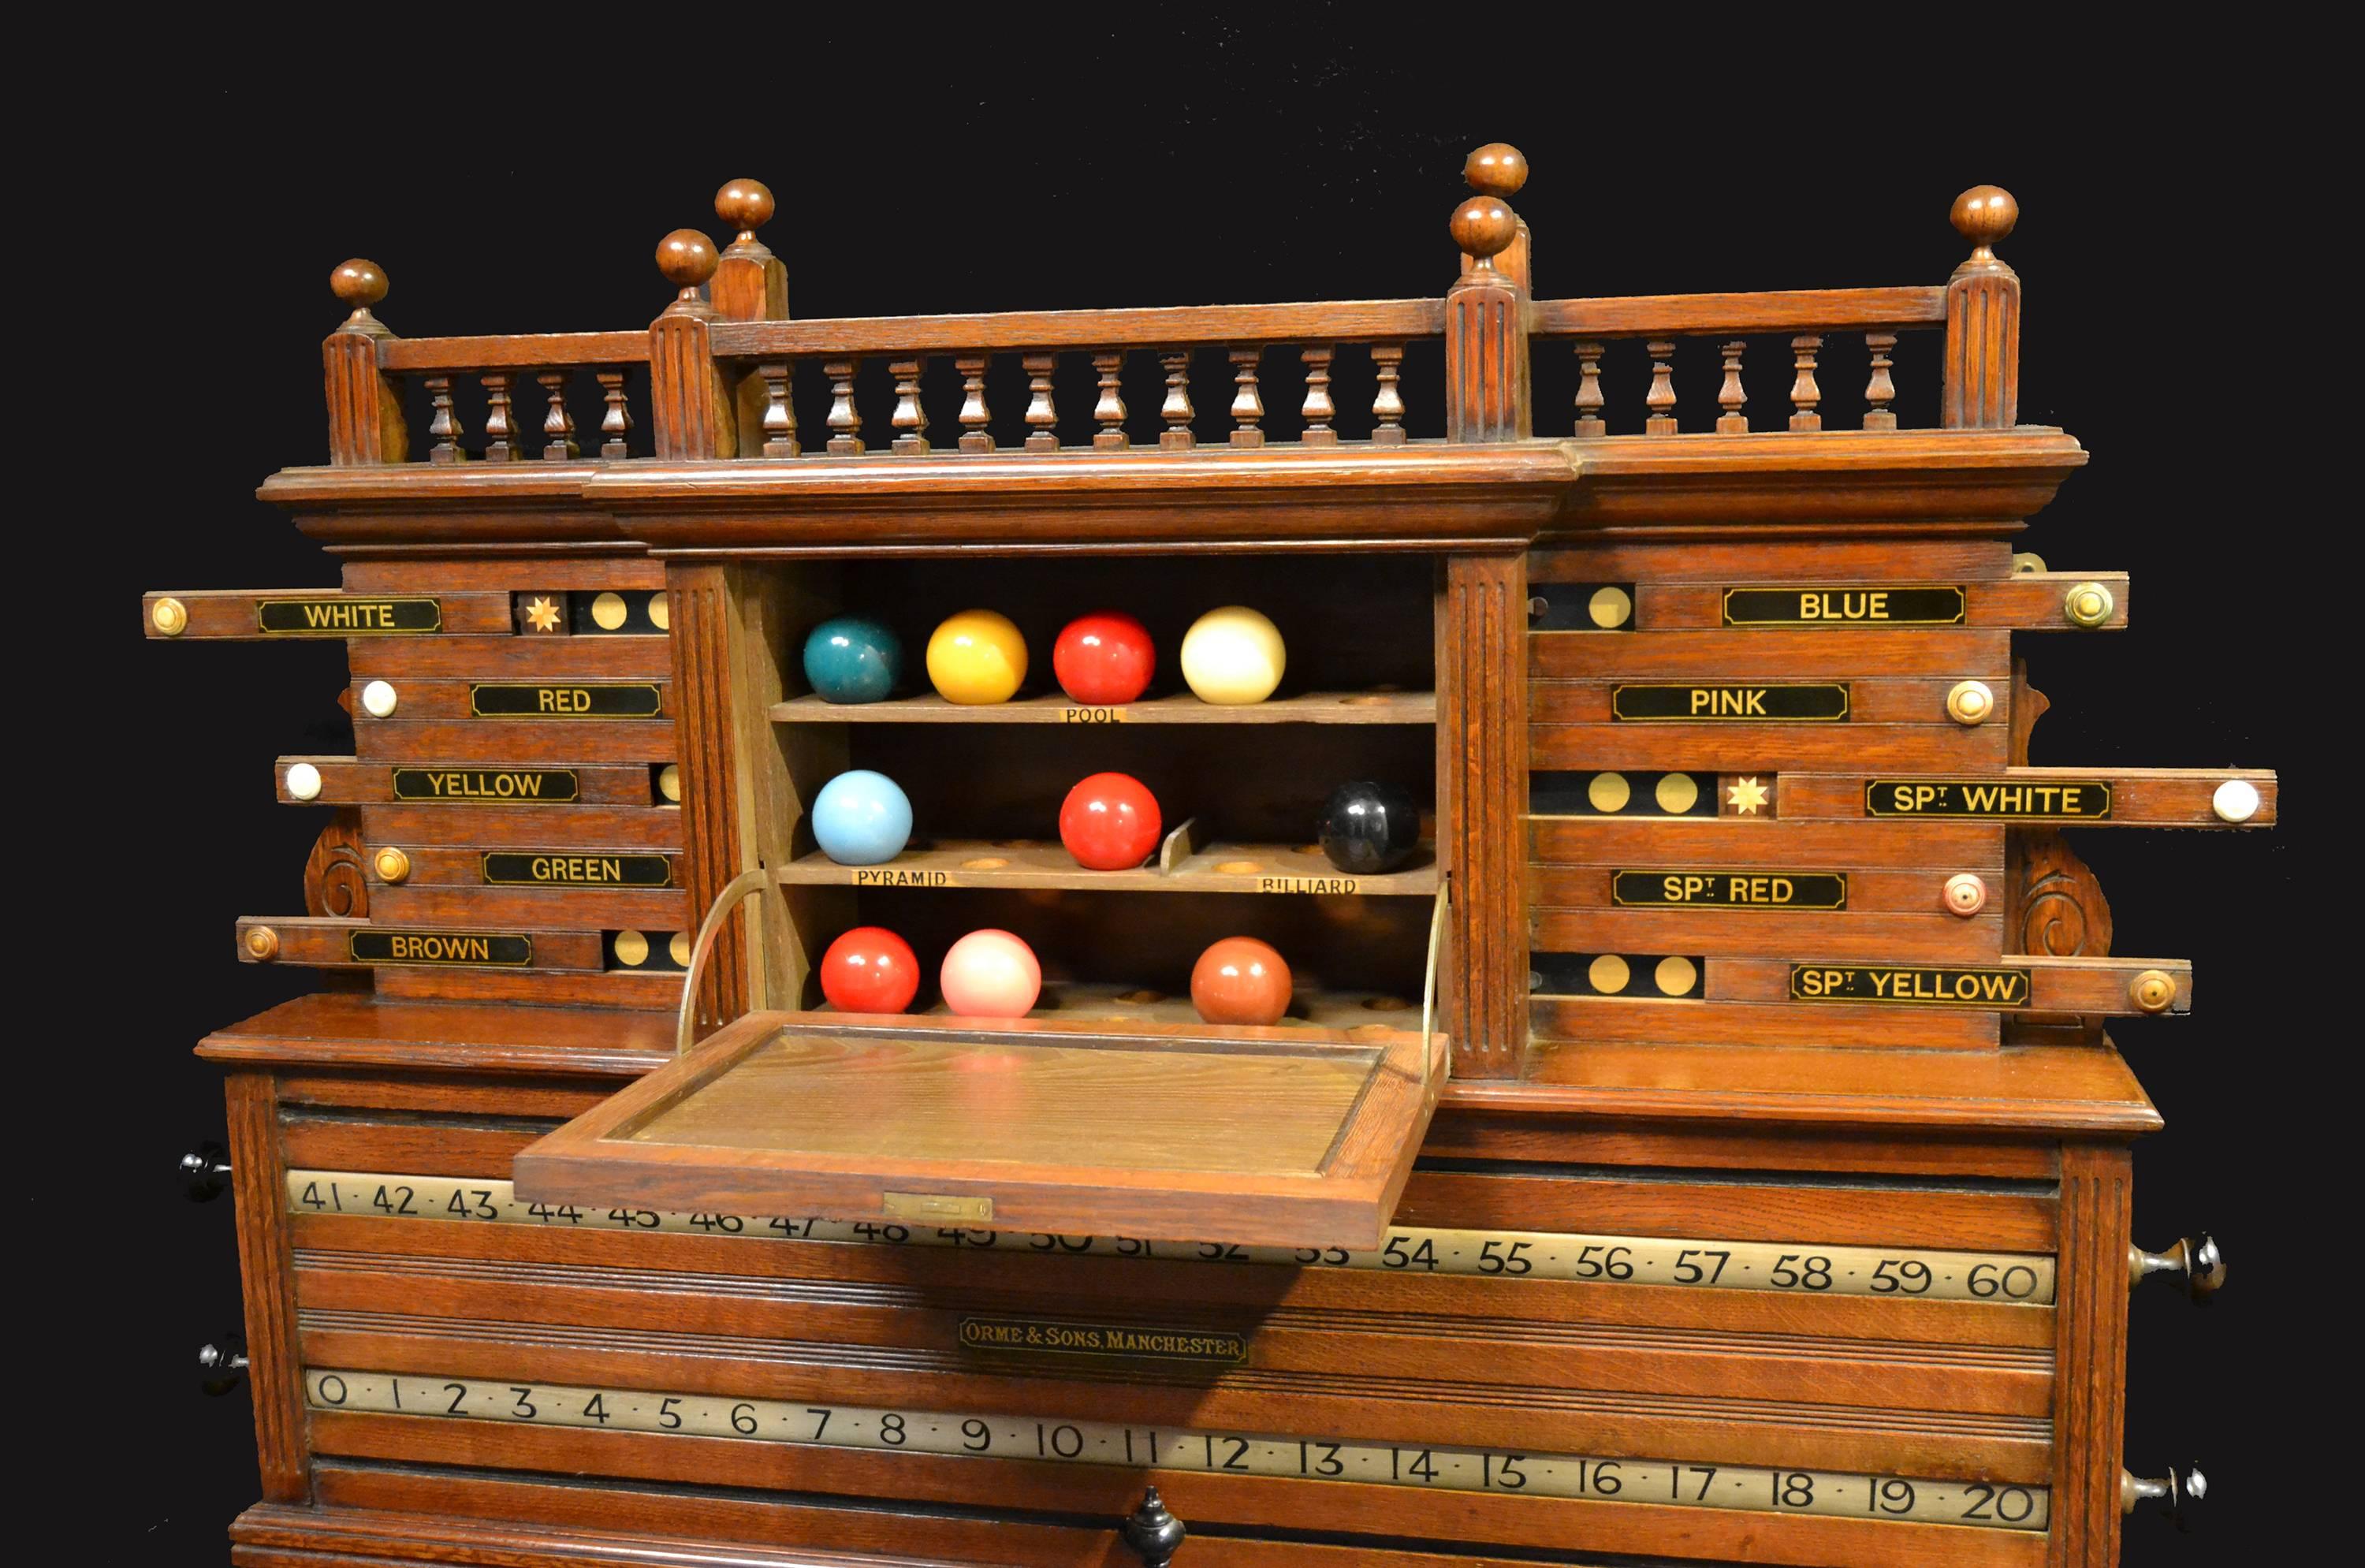 This wonderfully constructed Billiards scoring cabinet consists of revolving number bars, life pool sliders and a central slate section which opens to reveal a hidden ball storage compartment. Made by 